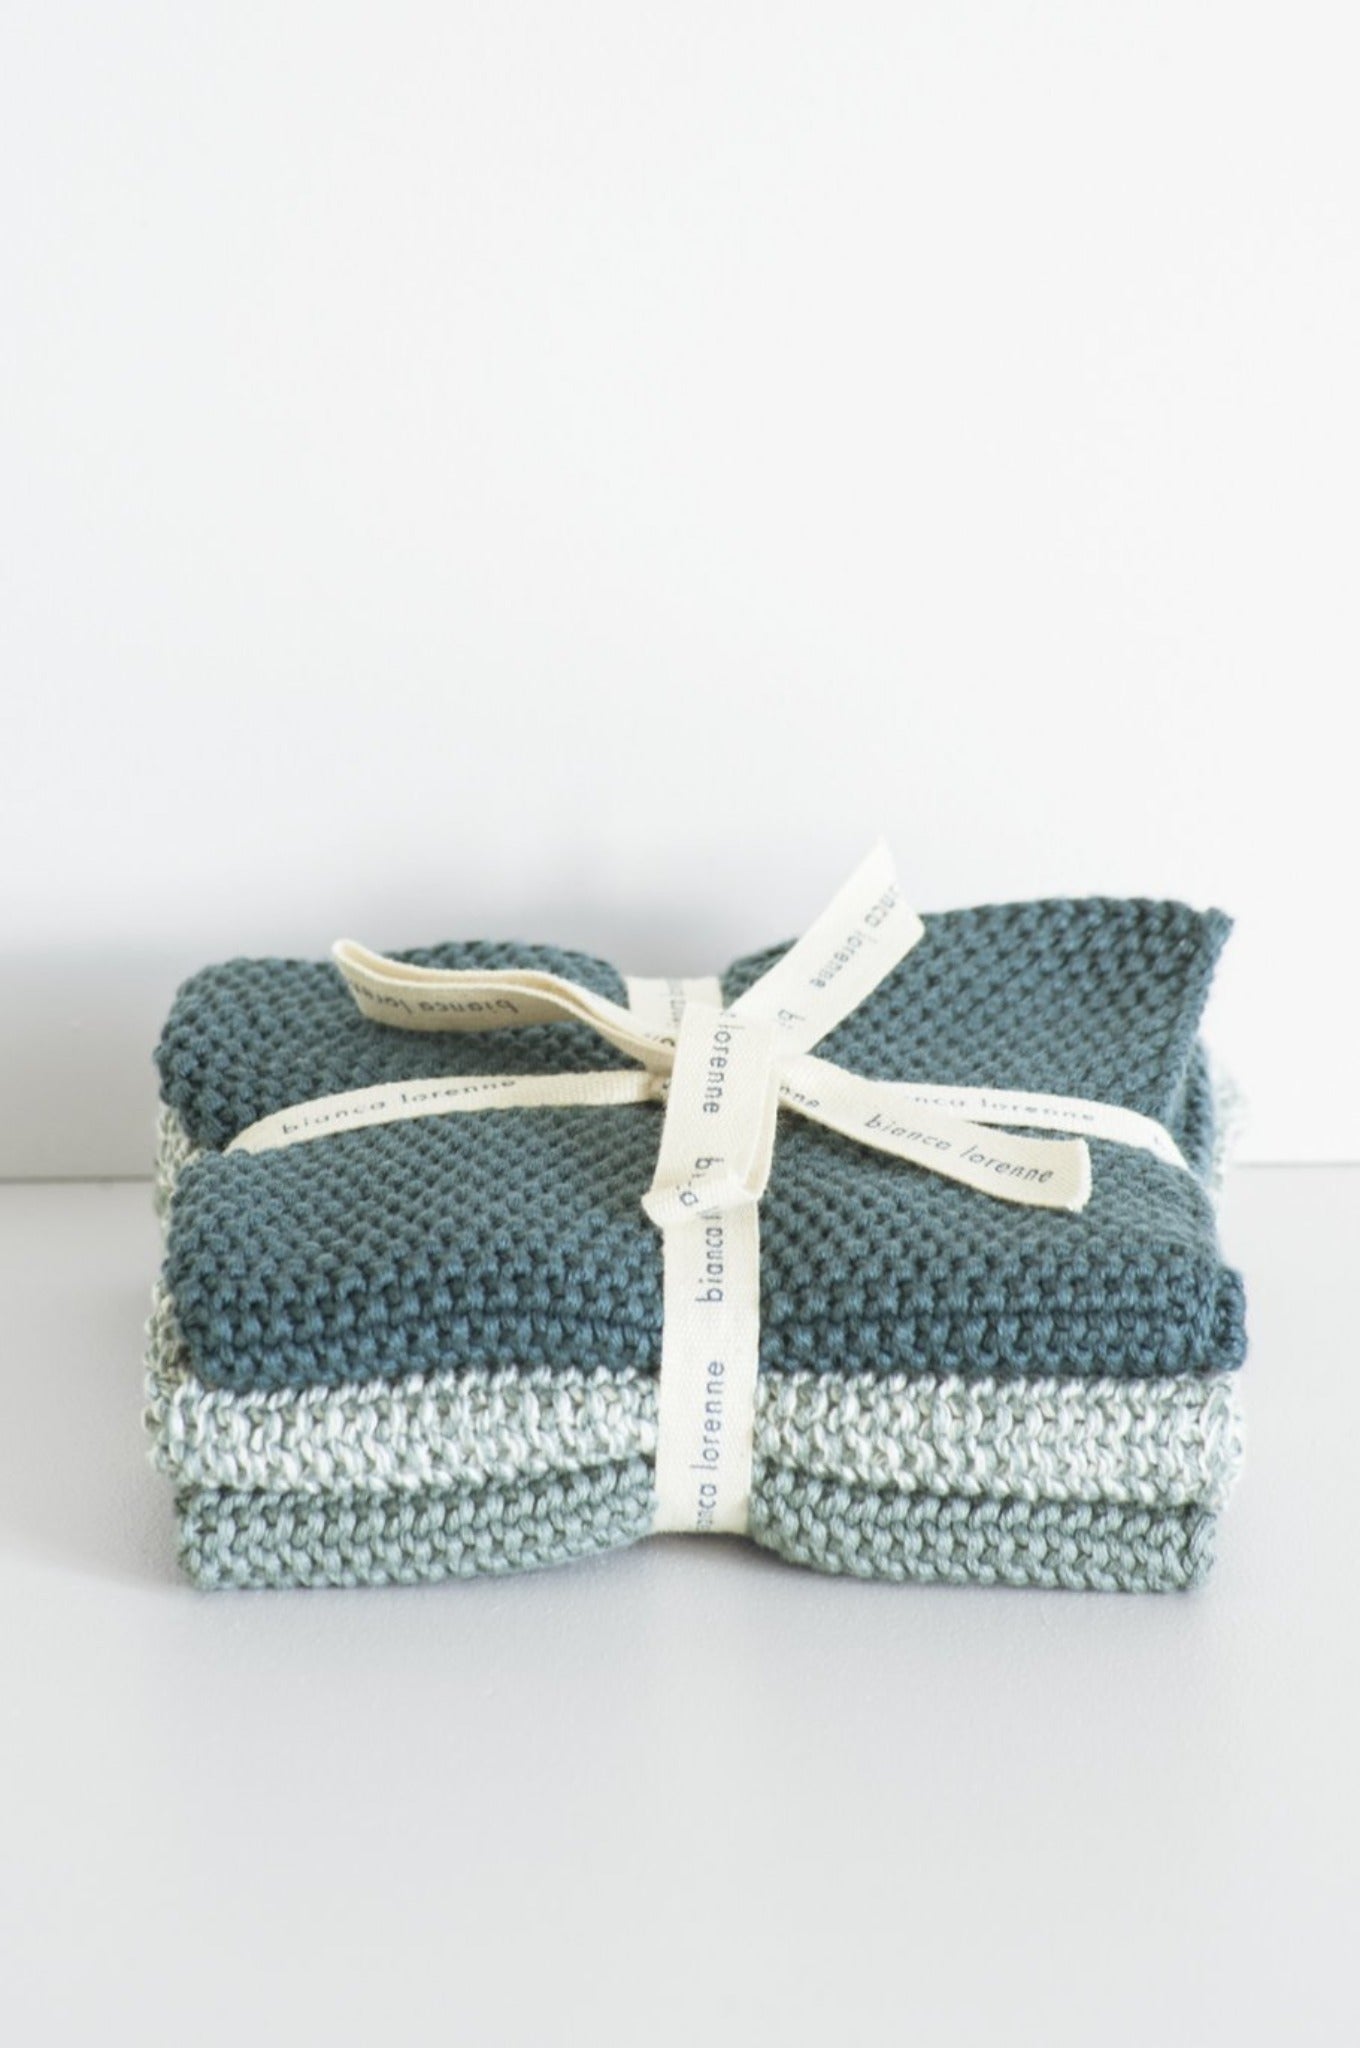 Bianca Lorenne pure cotton knitted washcloths, set of 3 in shades of teal green.